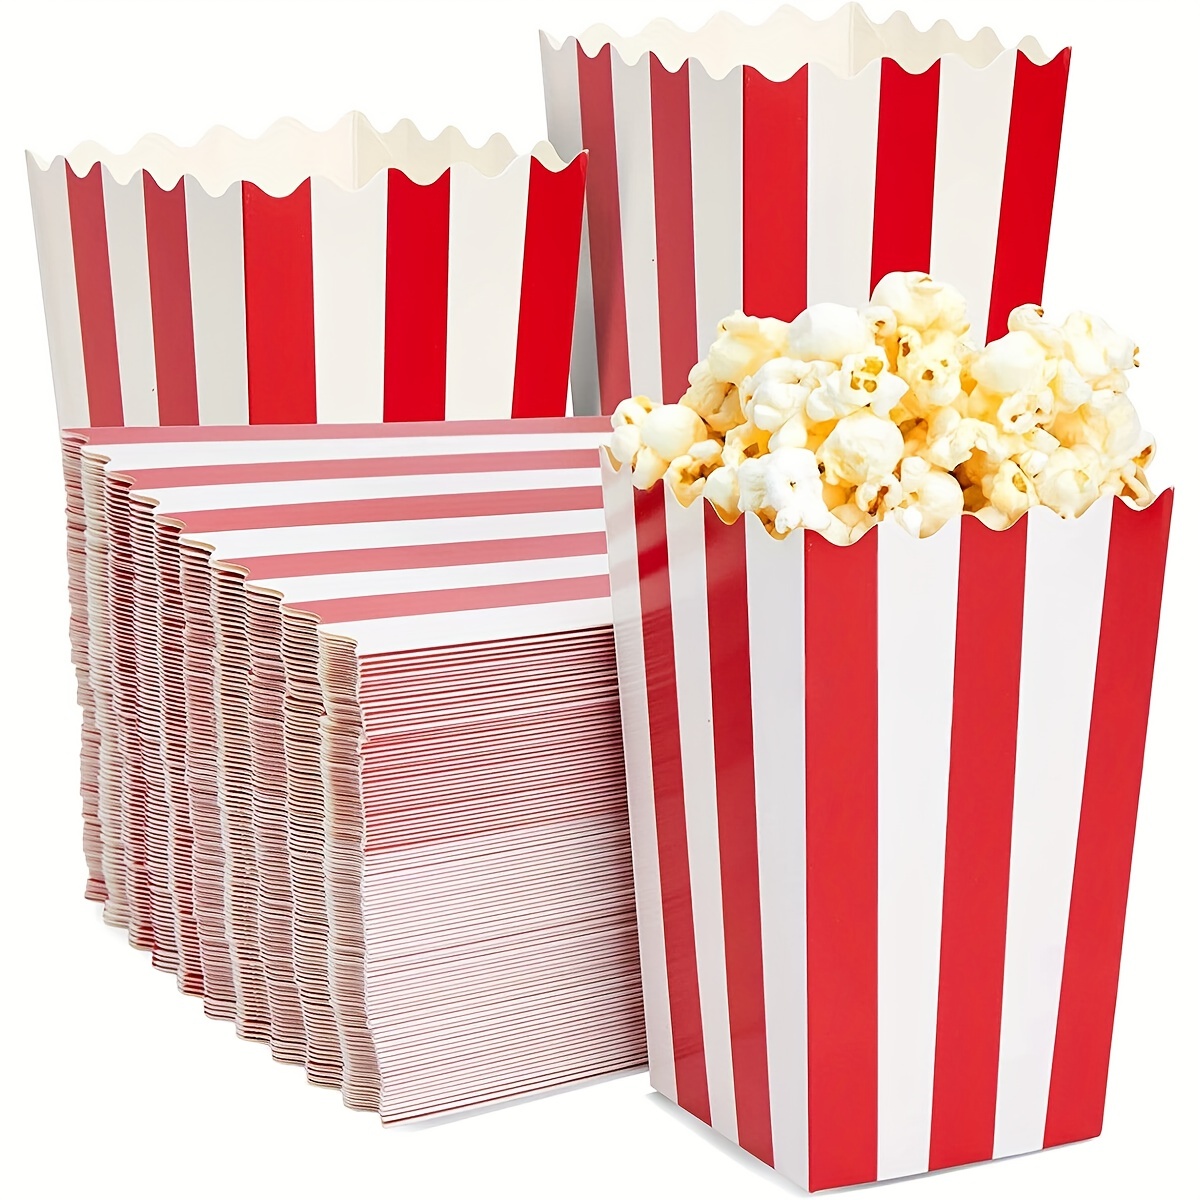 

50pcs, Popcorn Box Take Out Disposable Food Paper Box Fries Box Square Folding Fried Chicken Bucket Cinema Supplies Movie Party Favor